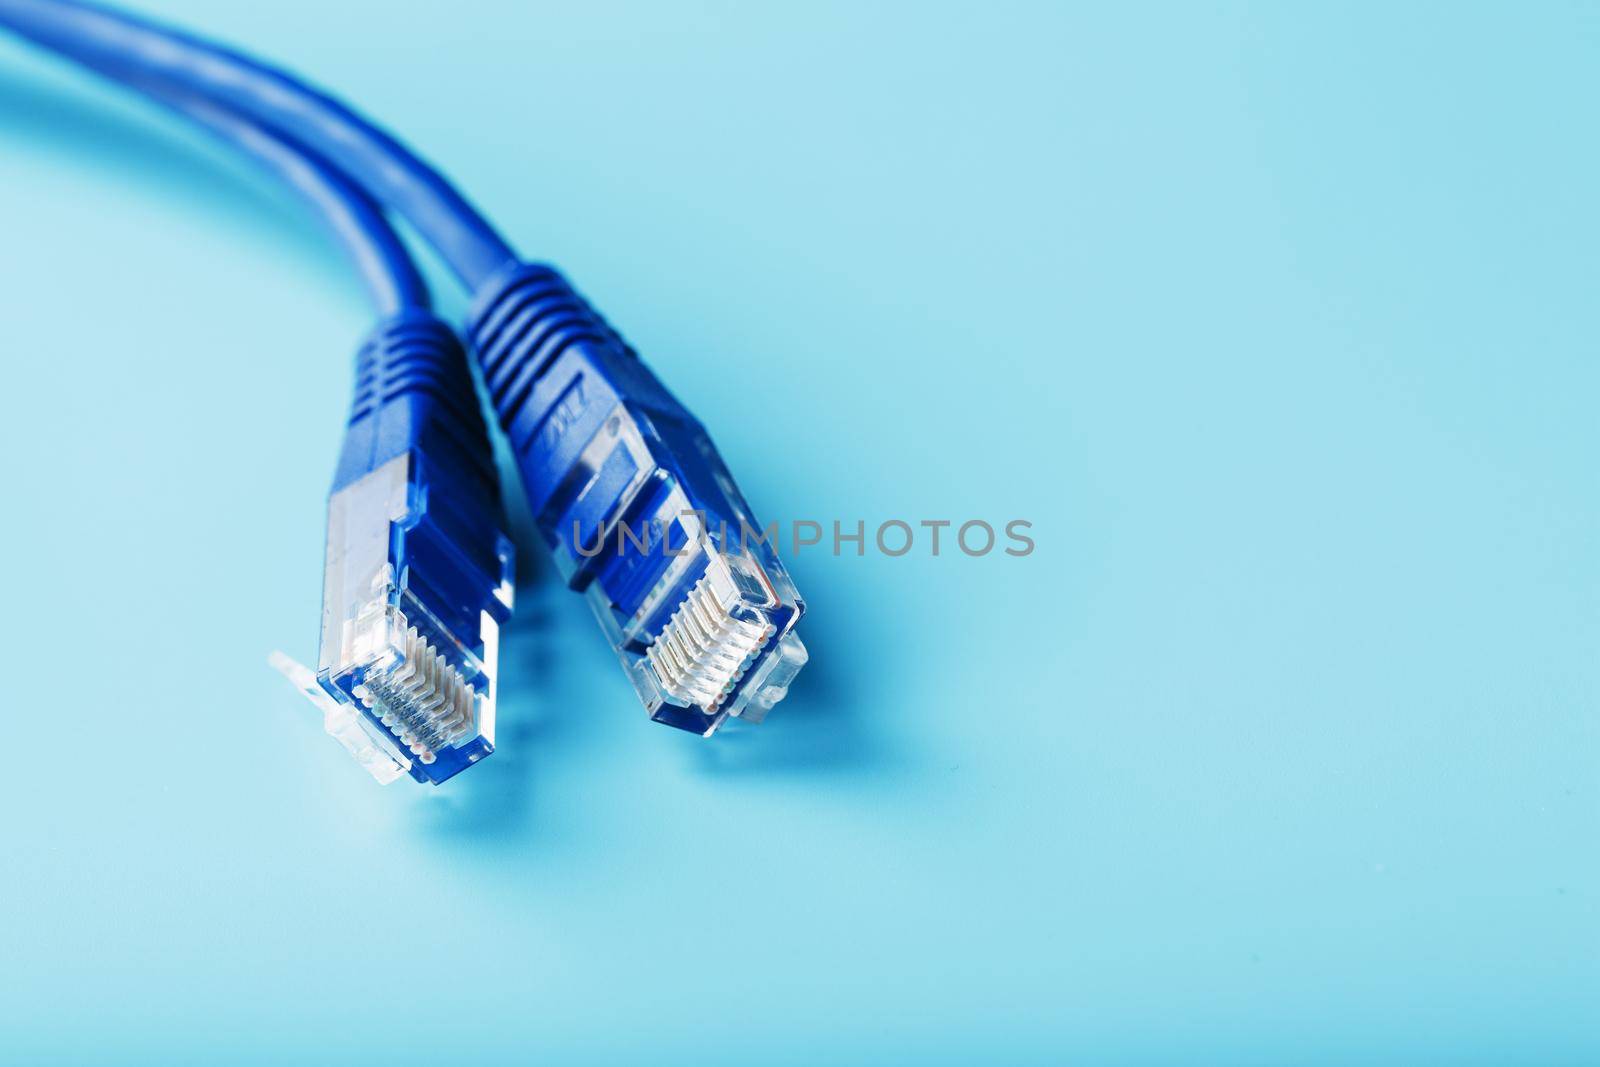 Ethernet Cable connector Patch cord cord close-up on a blue background with free space by AlexGrec